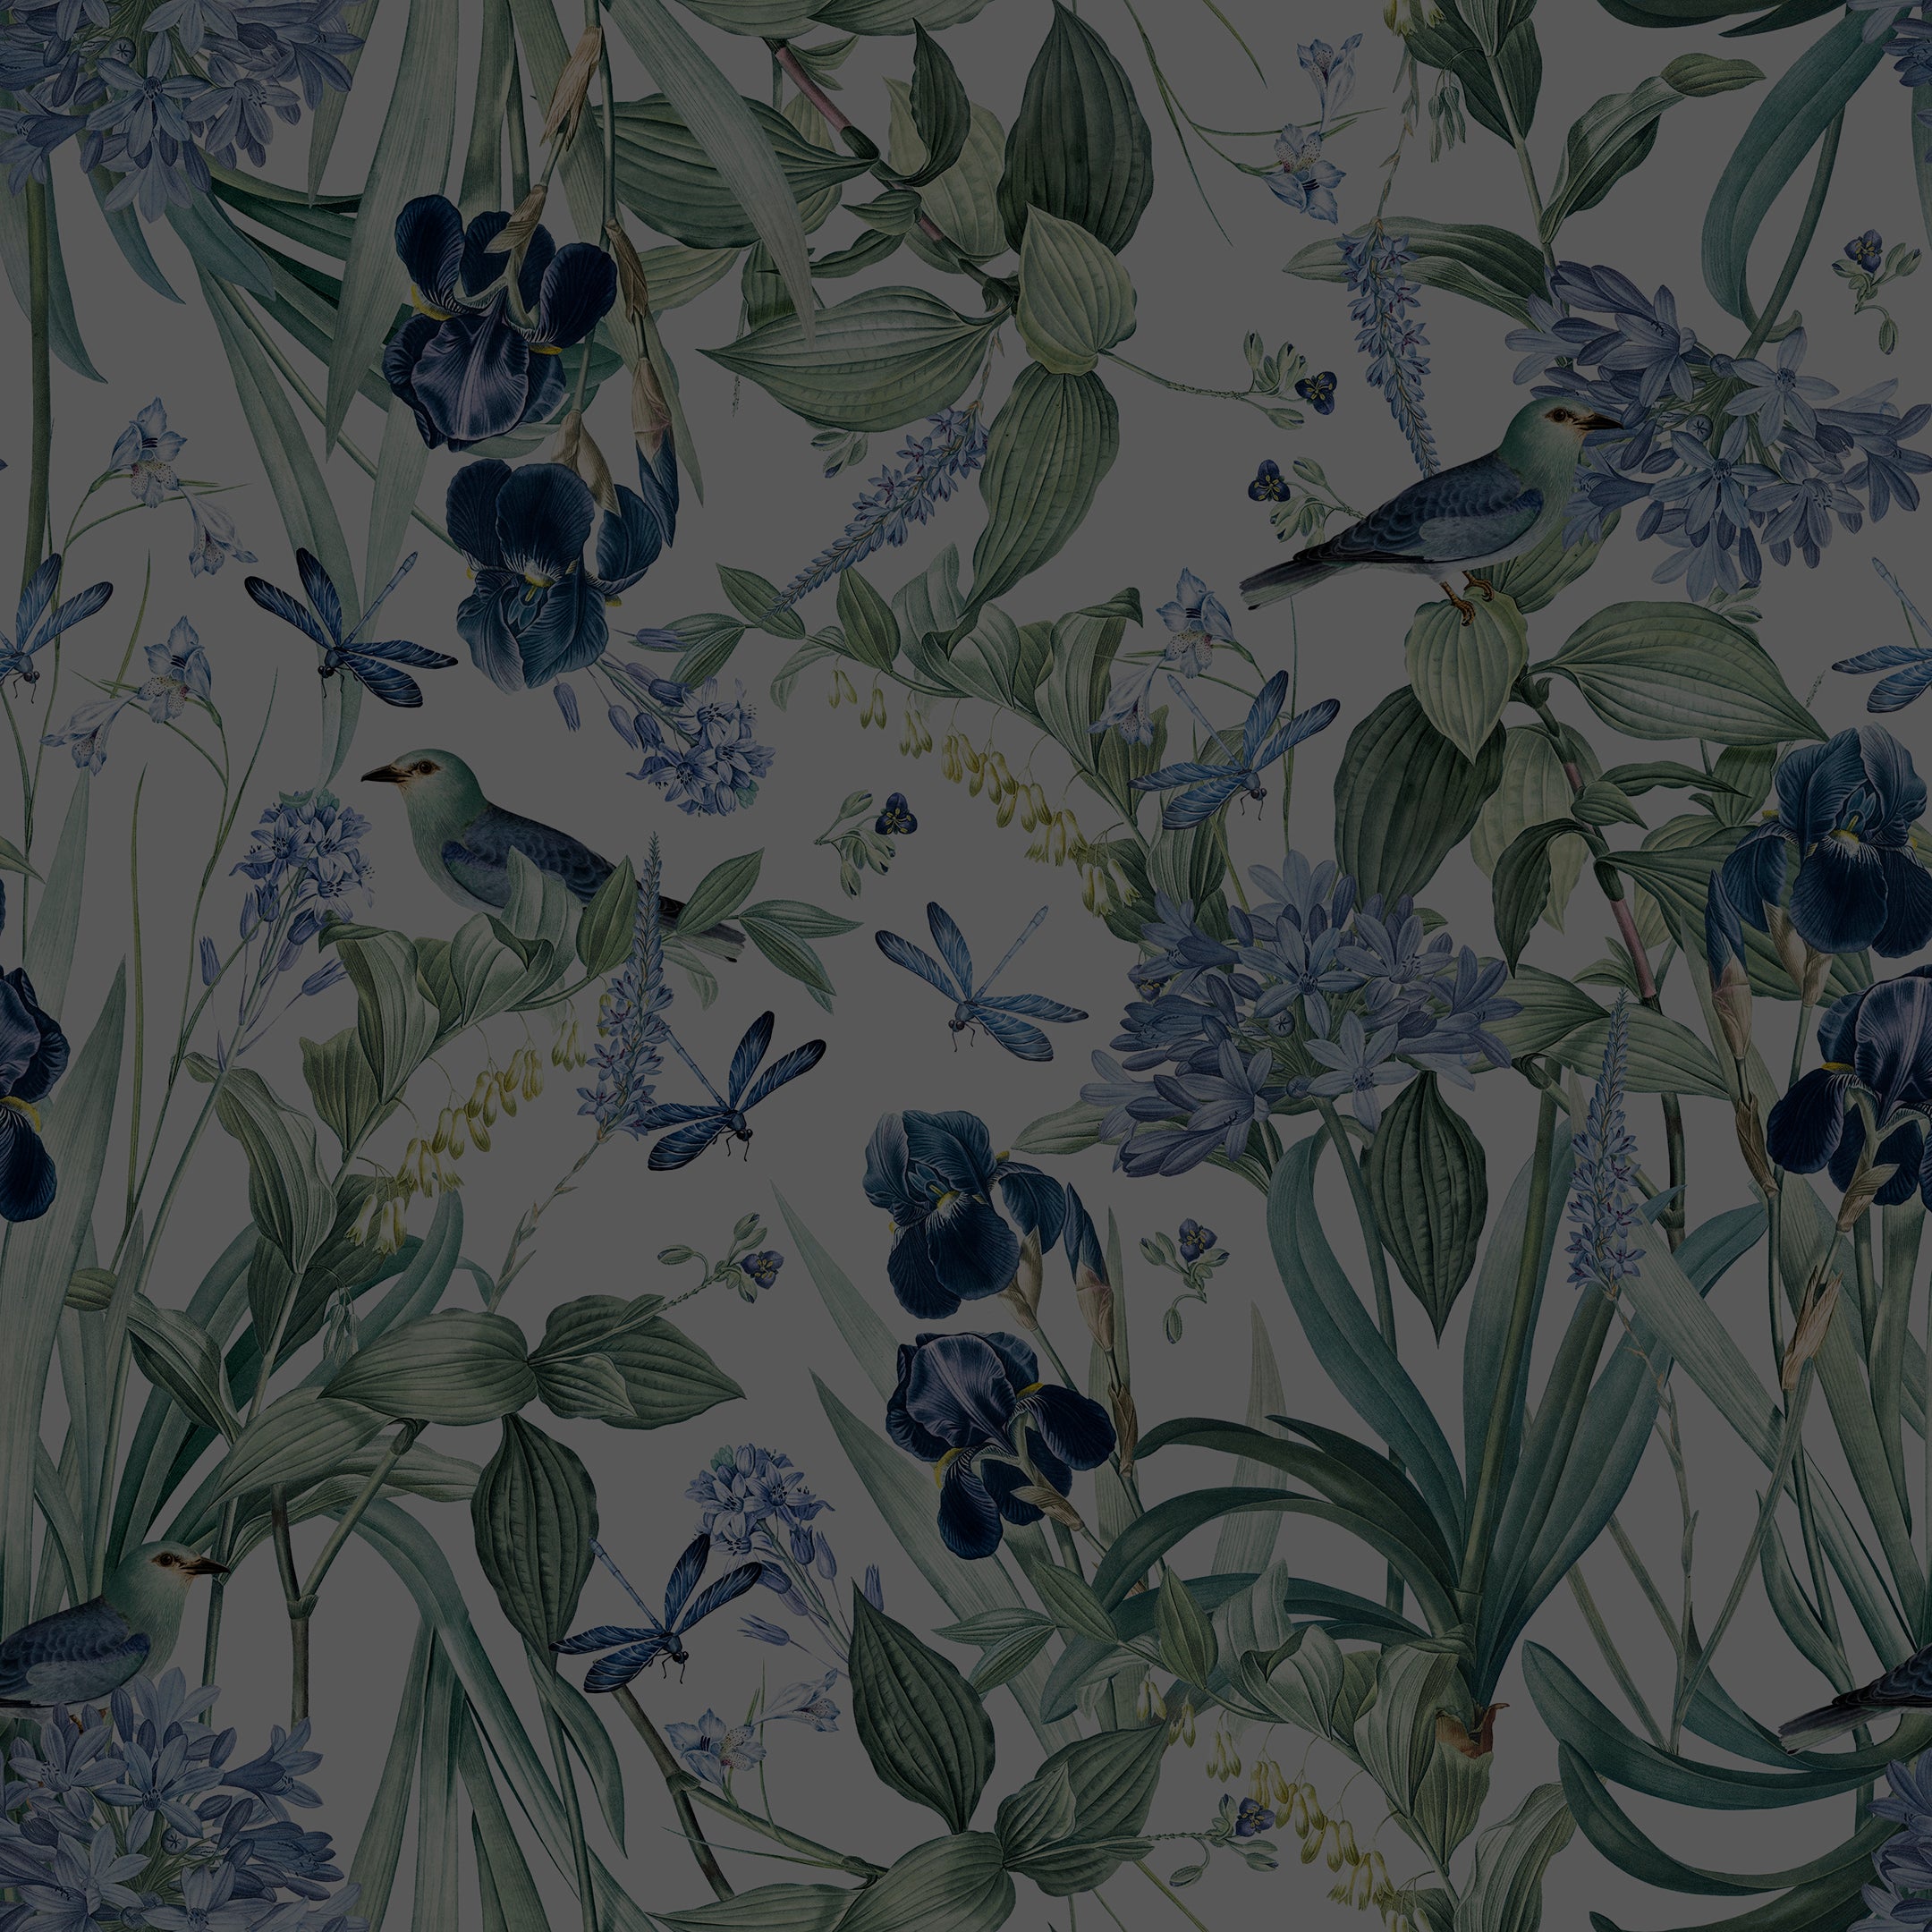 A detailed close-up of the Mint Floral Wallpaper on a slate background, featuring intricate illustrations of mint green leaves, blue flowers, and birds, with accents of dragonflies.